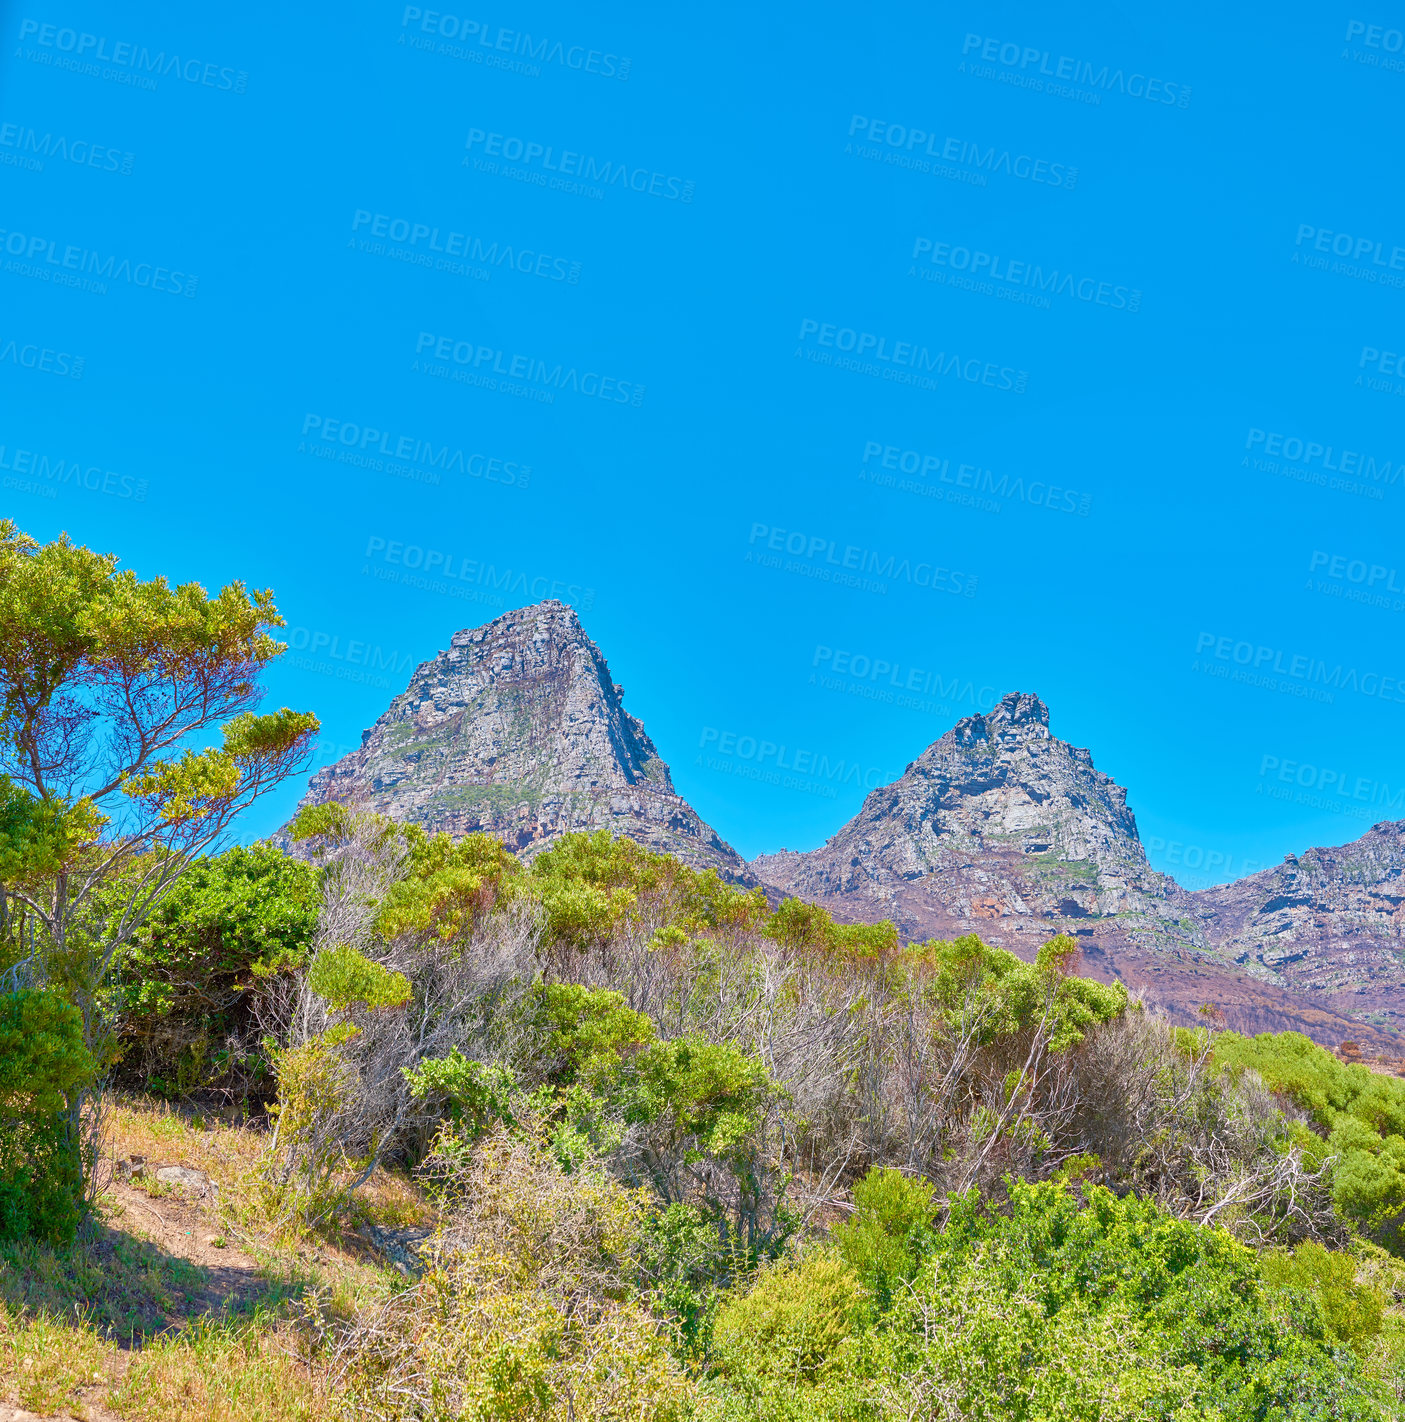 Buy stock photo Scenic landscape mountain view of the Twelve Apostles mountains in Cape Town, South Africa with blue sky and copy space. Famous hiking terrain with growing trees, shrubs, bushes. Travel and tourism